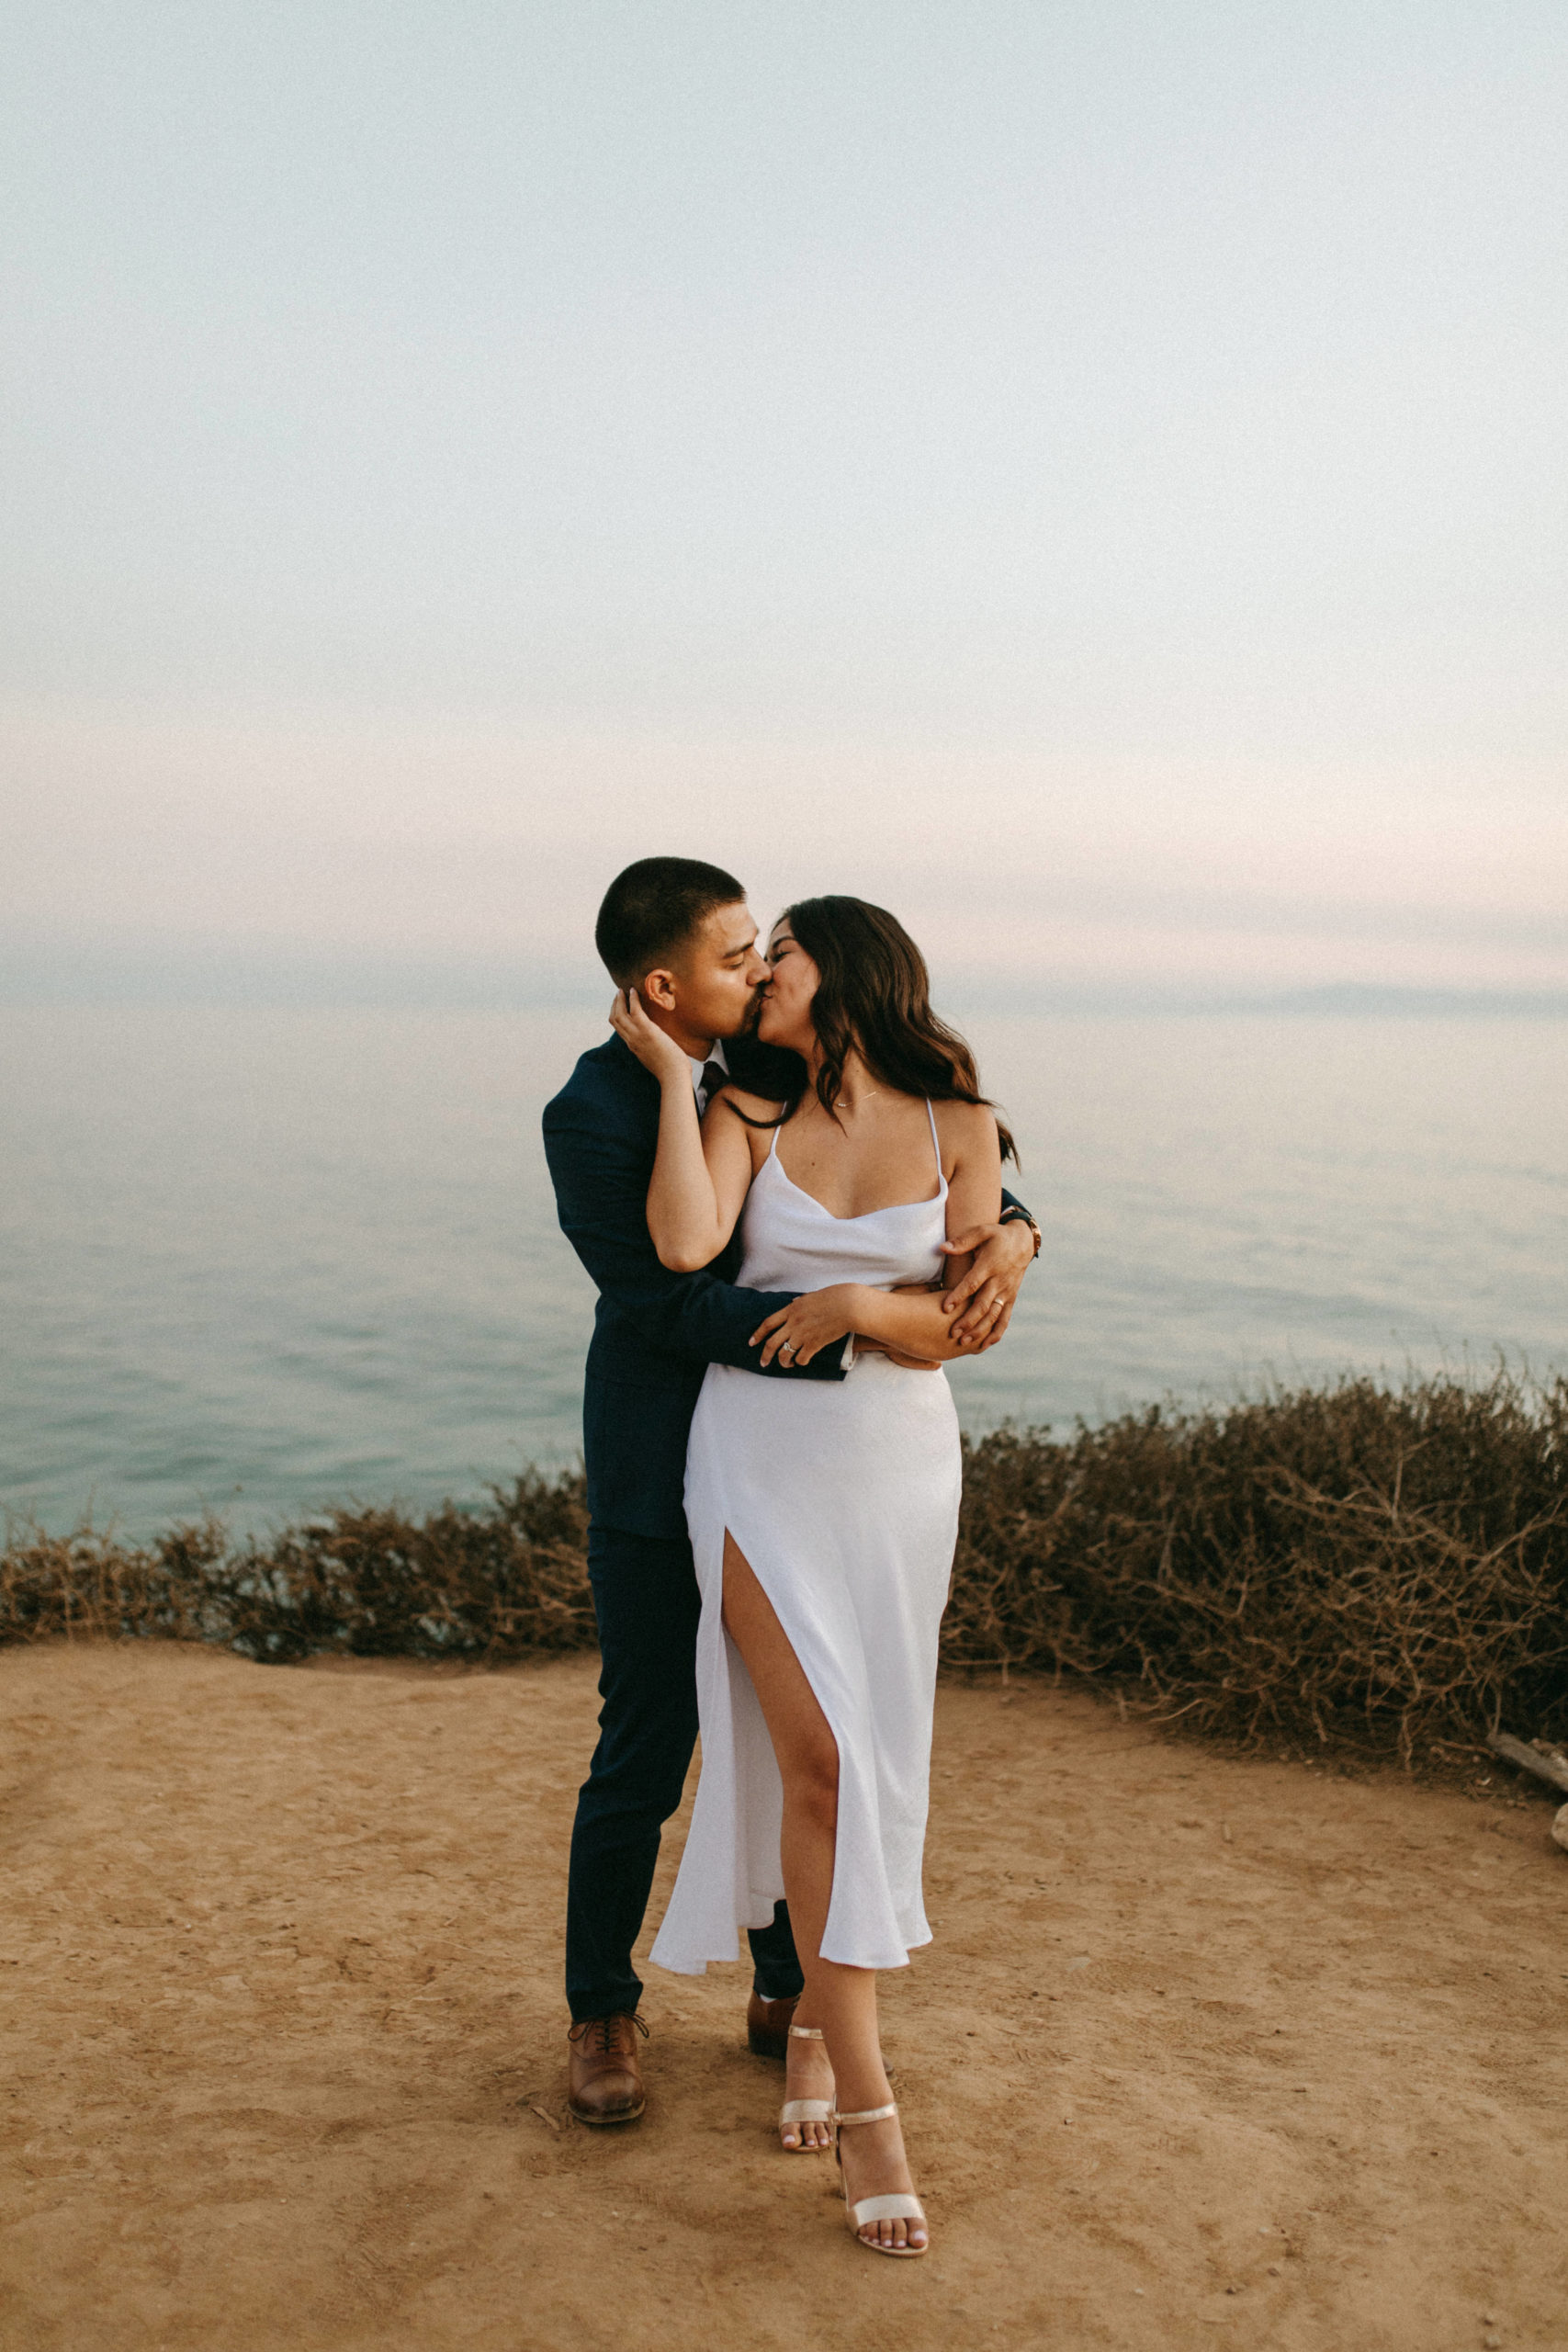 Jennifer and Jose have an intimate photoshoot on the Santa Barbara bluffs after their elopement at the Santa Barbara Court House.